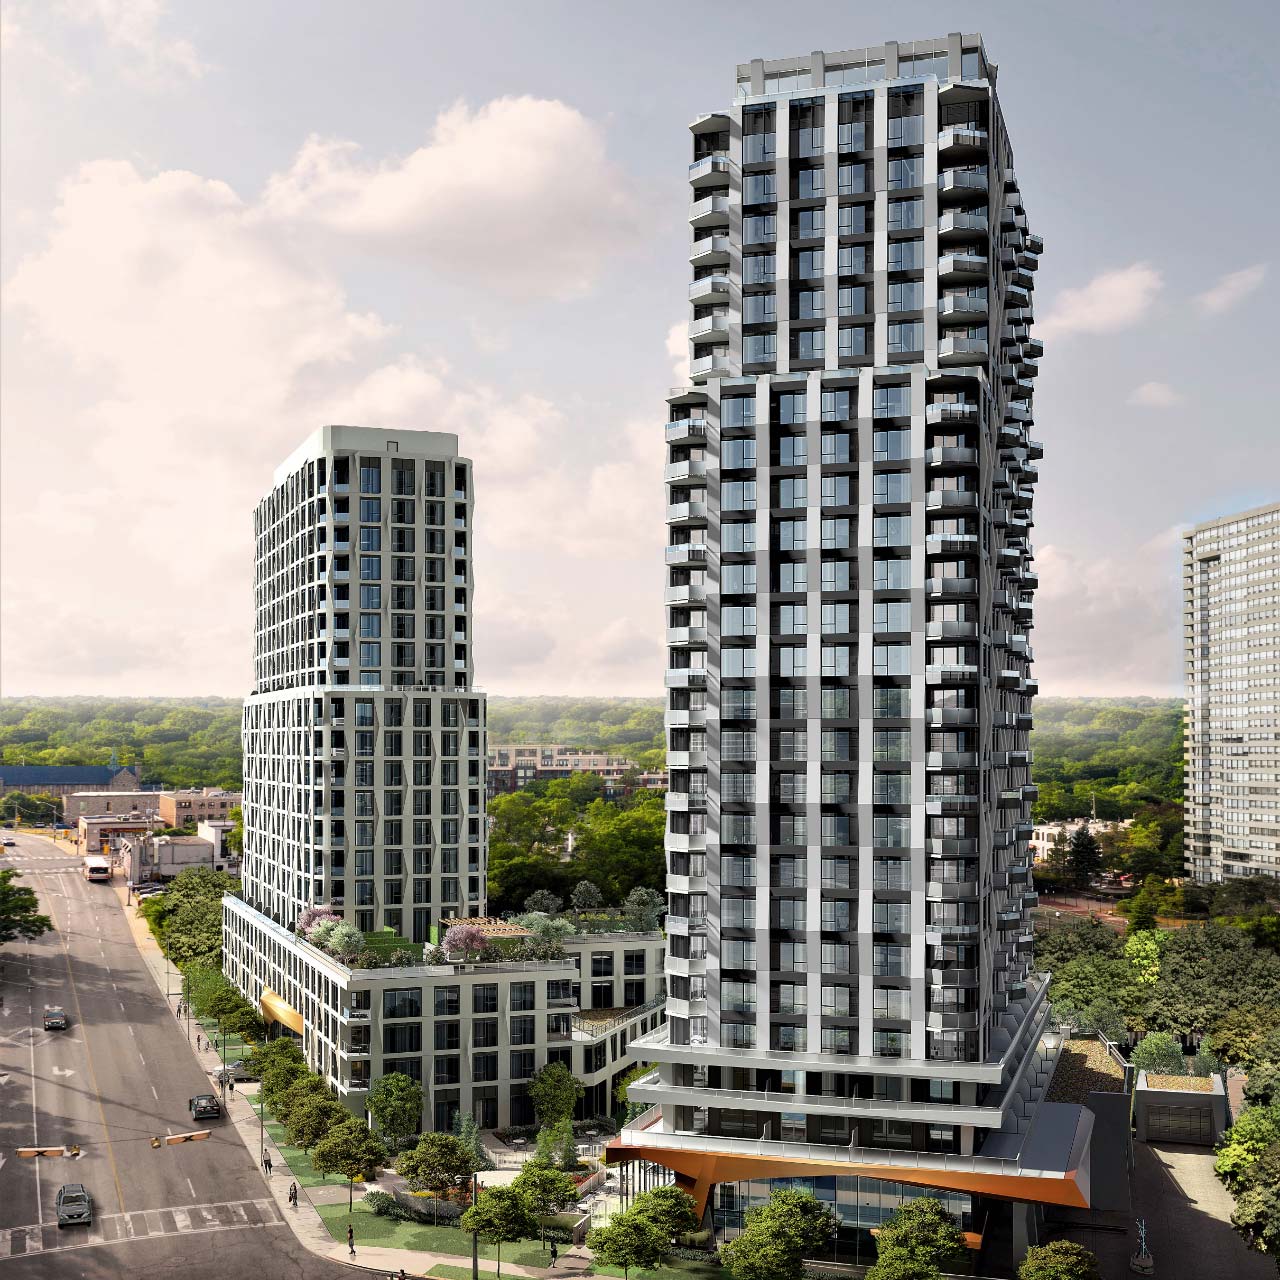 An overview of the Westerly Condo Building